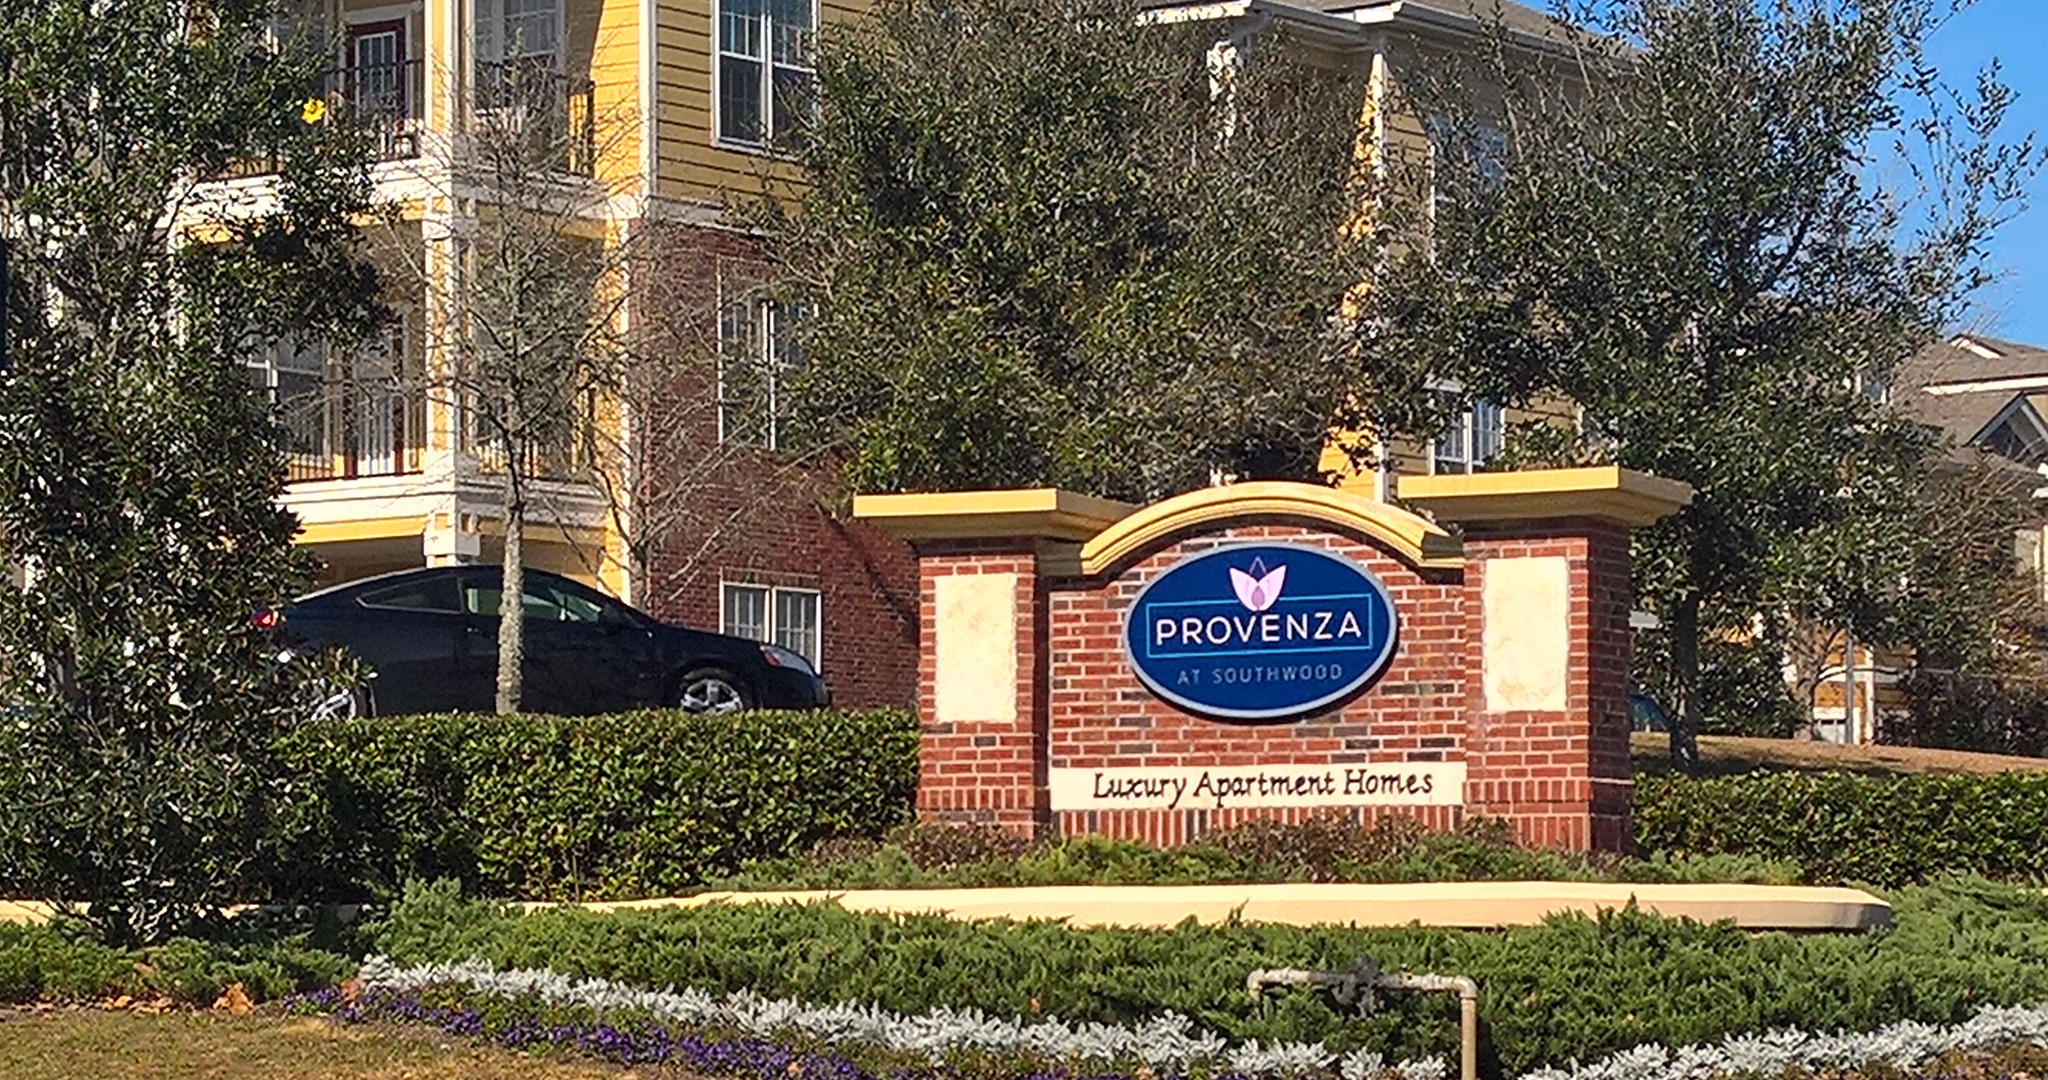 This is the entrance to one of our corporate housing communities inTallahassee.